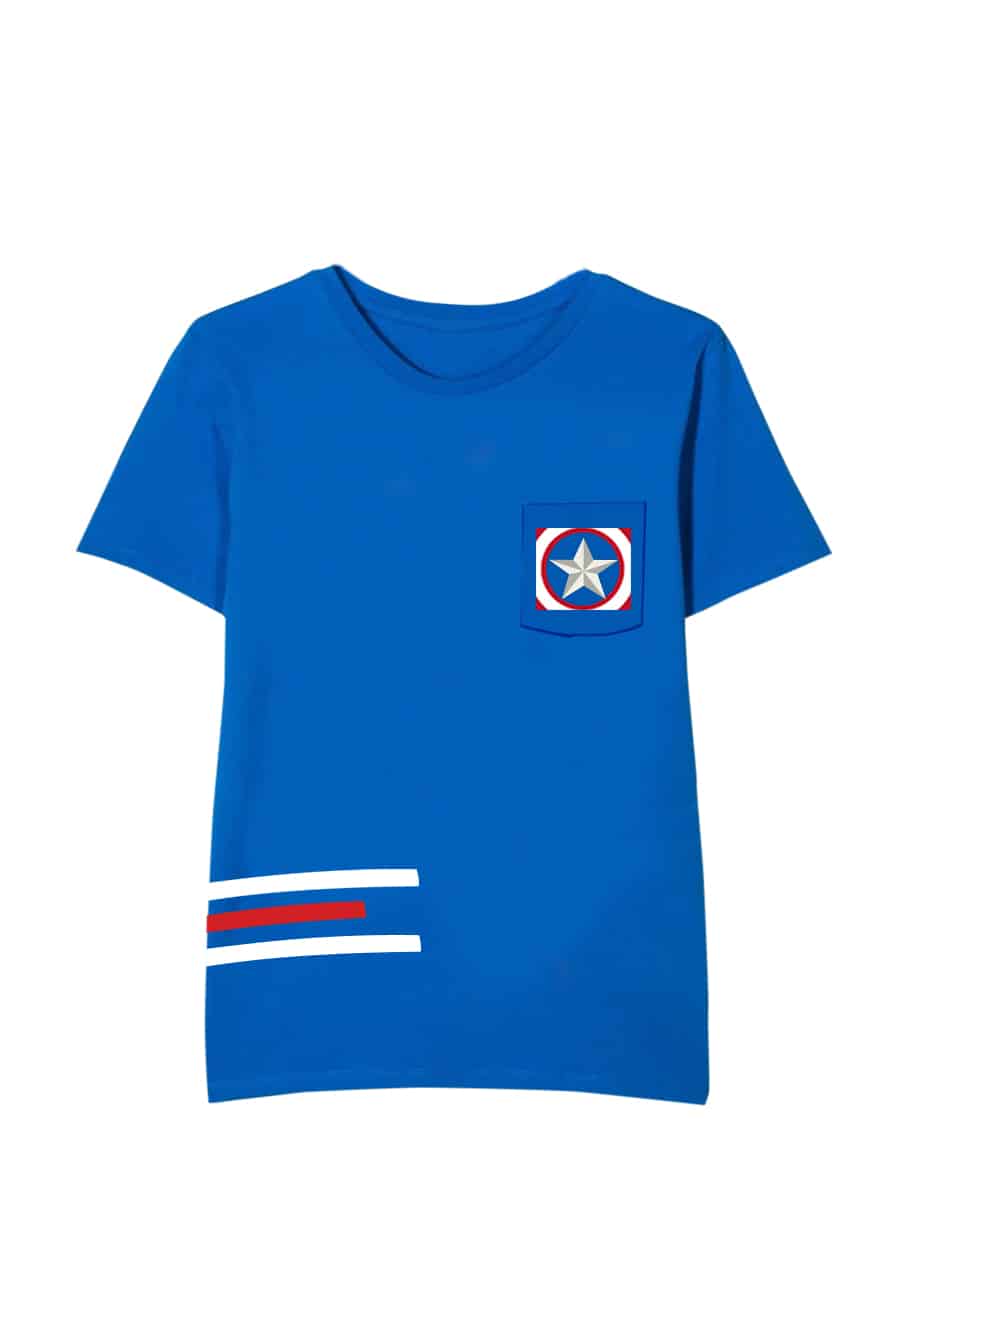 Super Captain Look with this hand-crafted T-Shirt-RKFCBT010